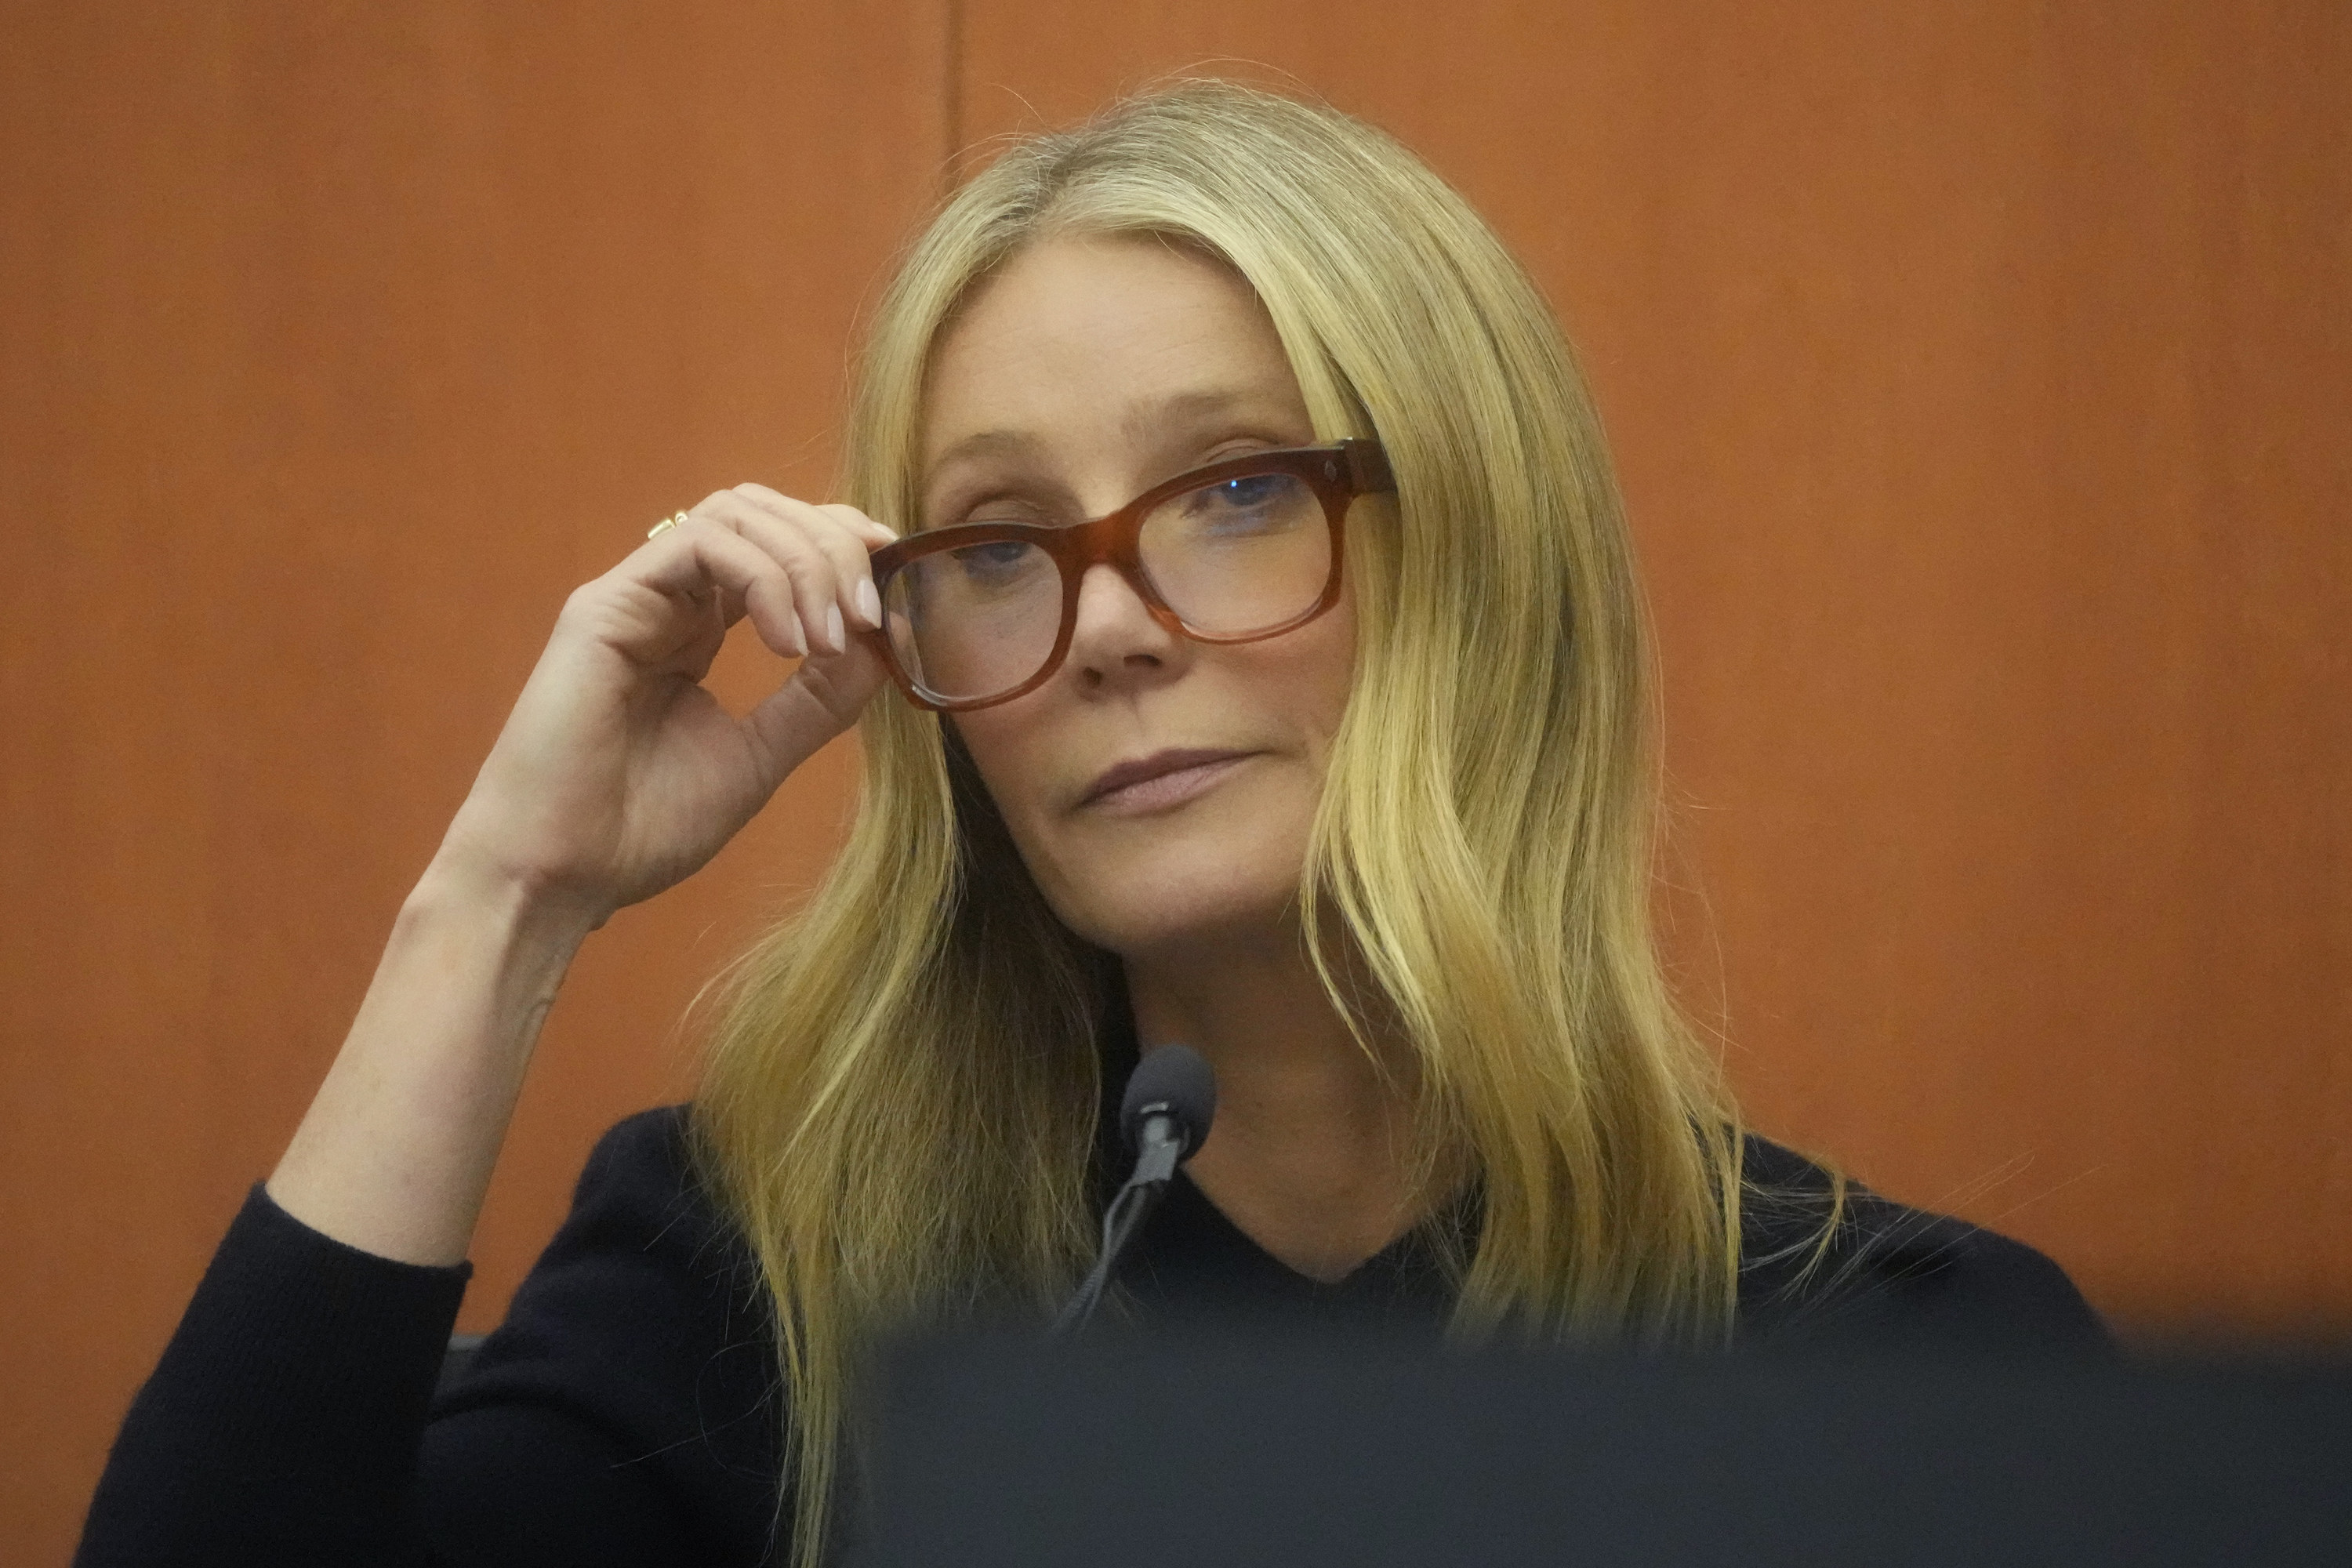 Gwyneth touching her glasses in court